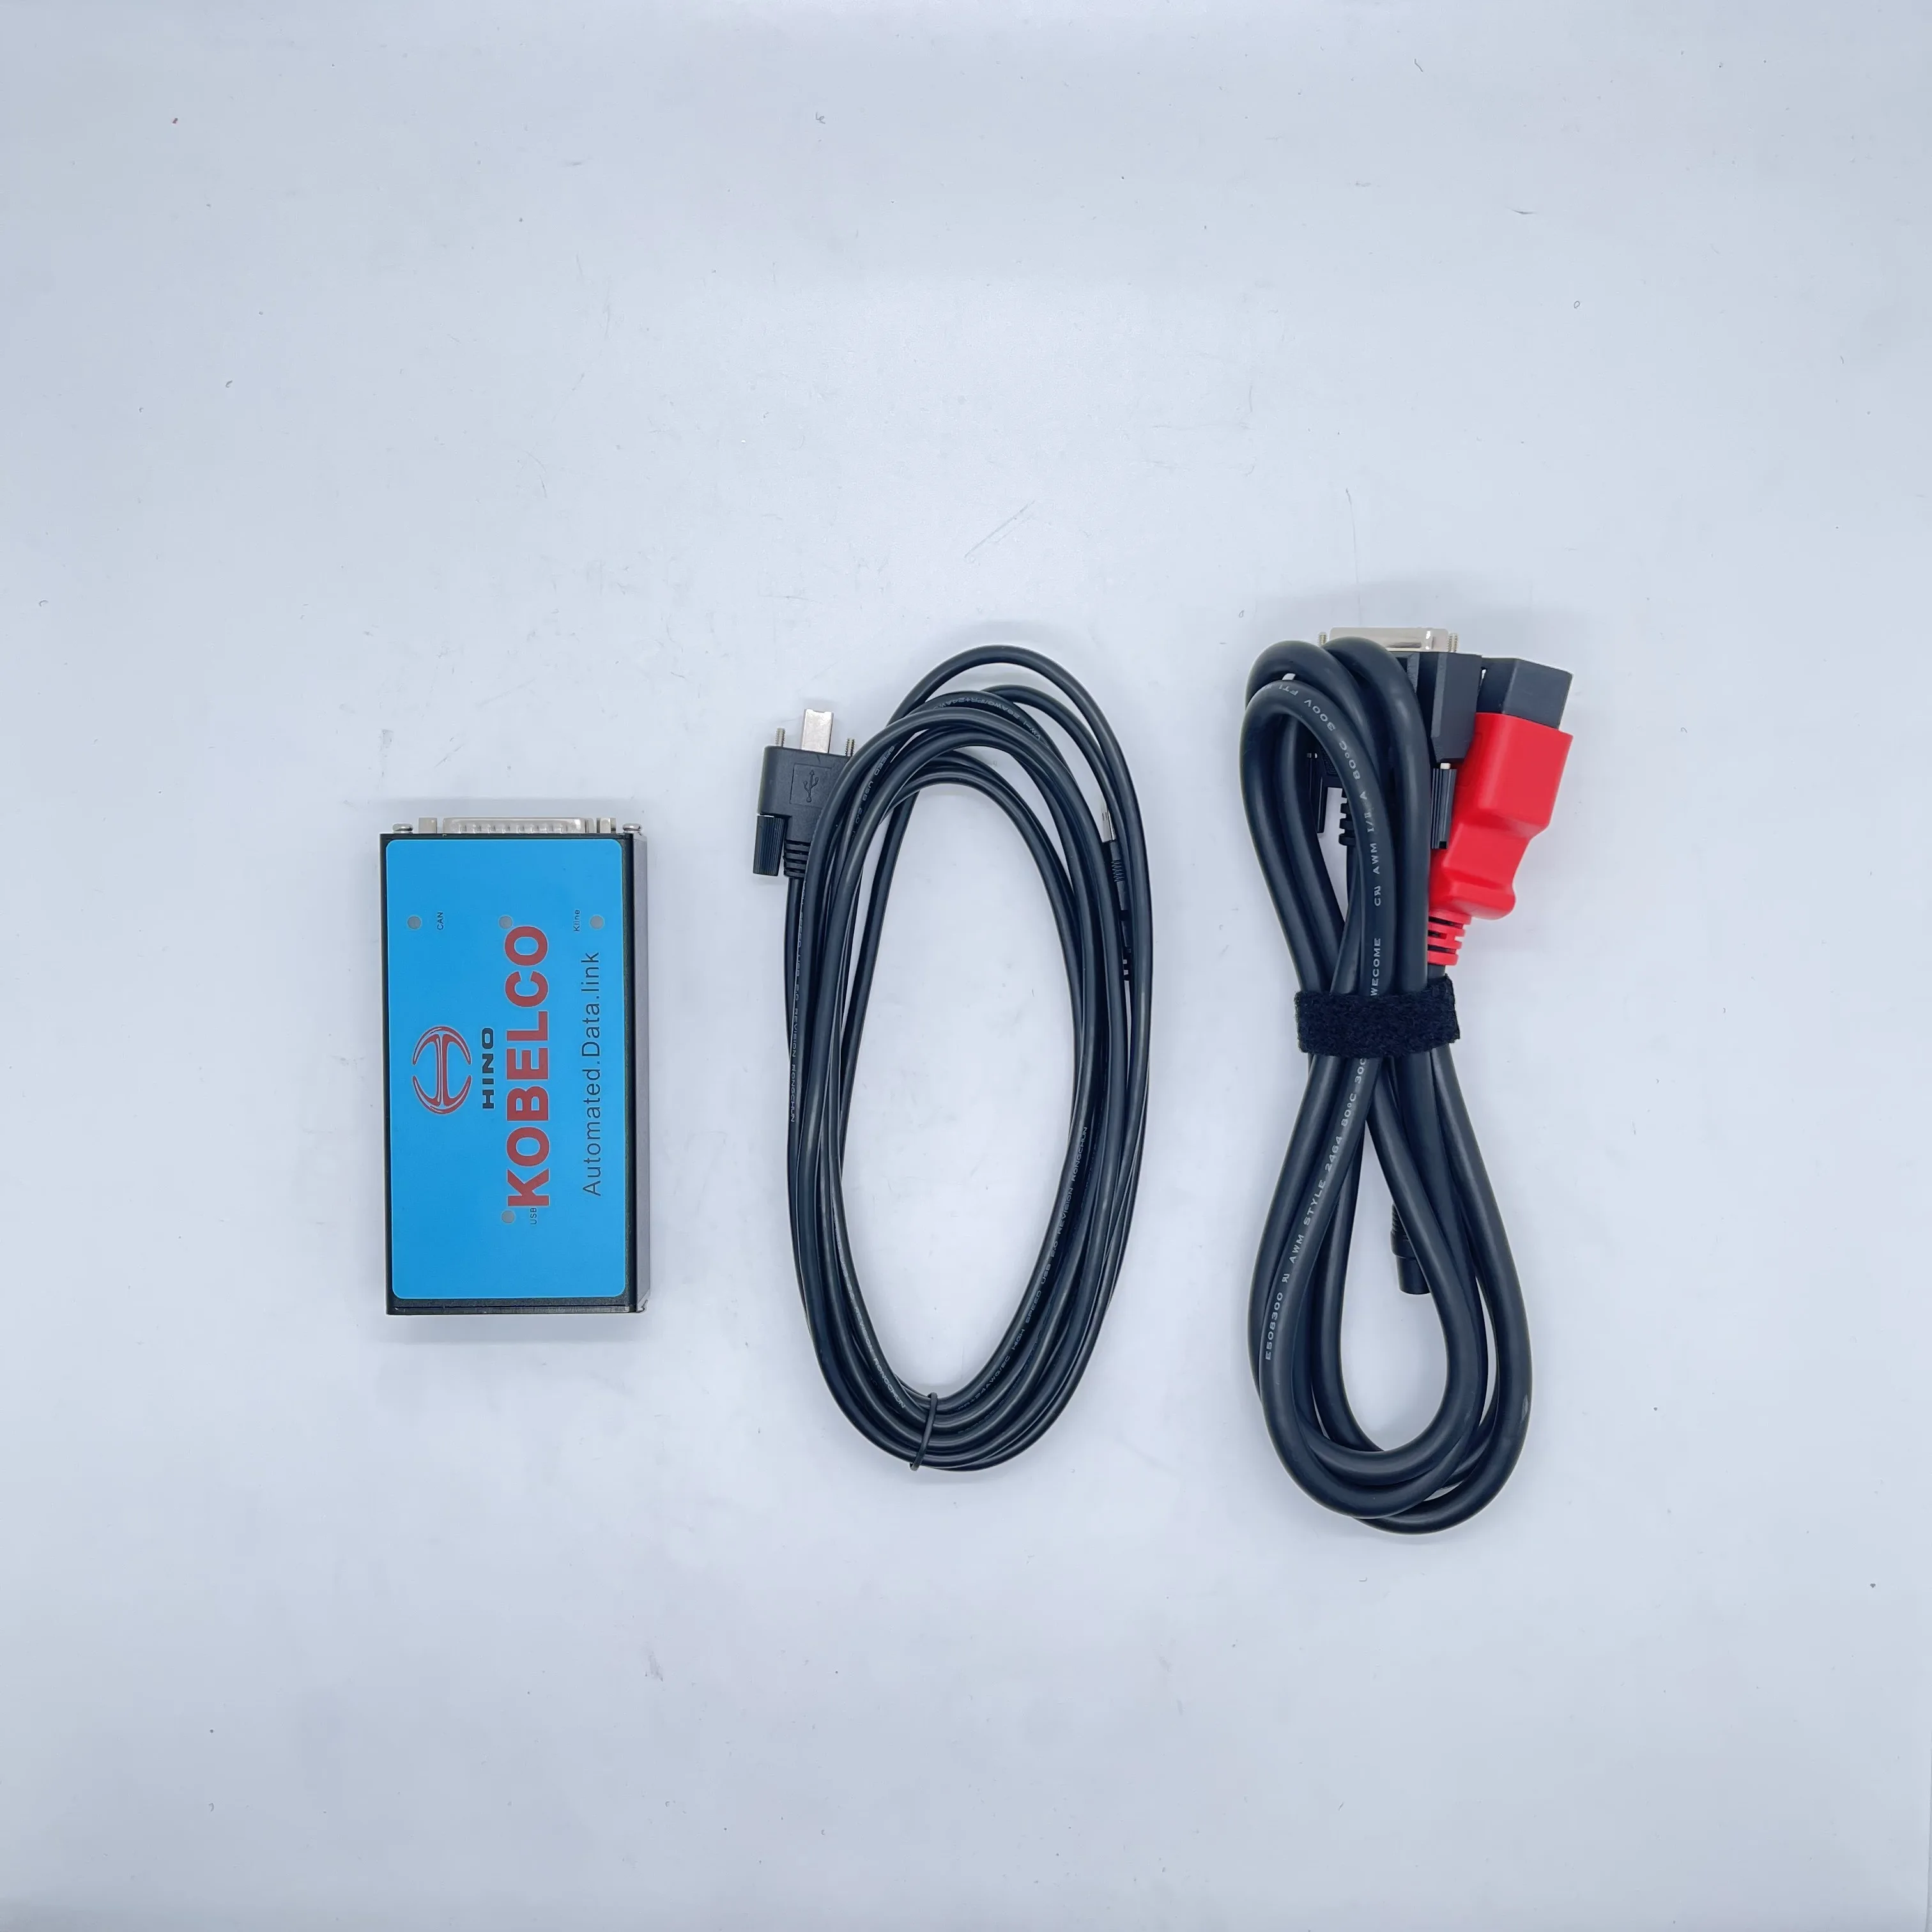 

09993-E9070 Scanning Detector Diagnostic Tool Automation Data Link Communication Adapter for Hino and Kobelco SK200-8 Excavator